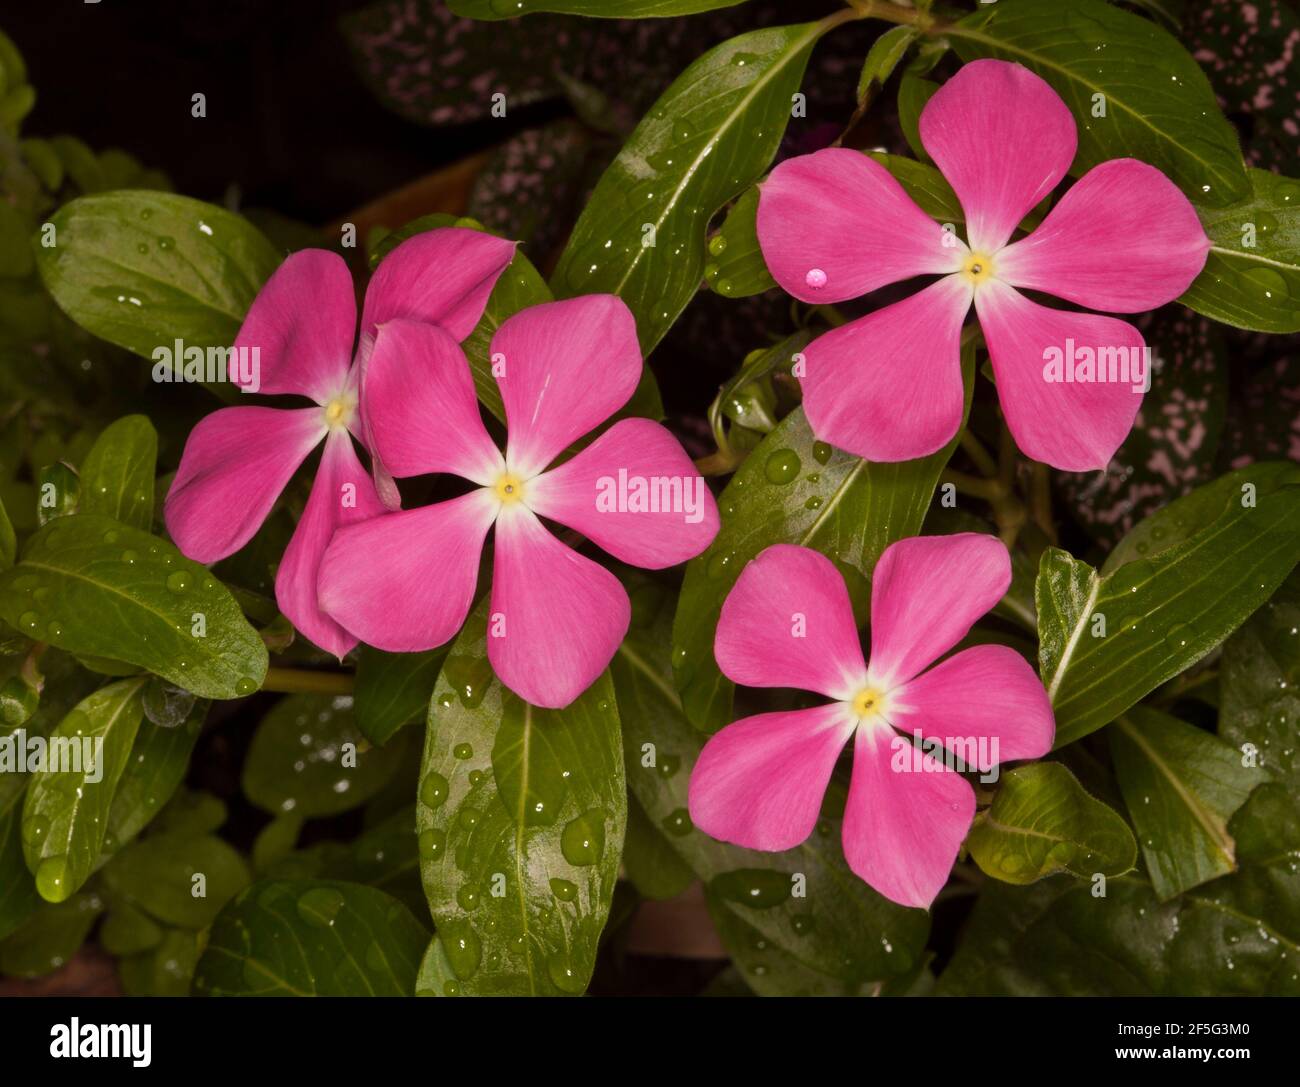 Bright pink flowers with white centres of Catharanthus roseus, Vinca, drought tolerant perennial garden plant, on background of emerald green foliage Stock Photo